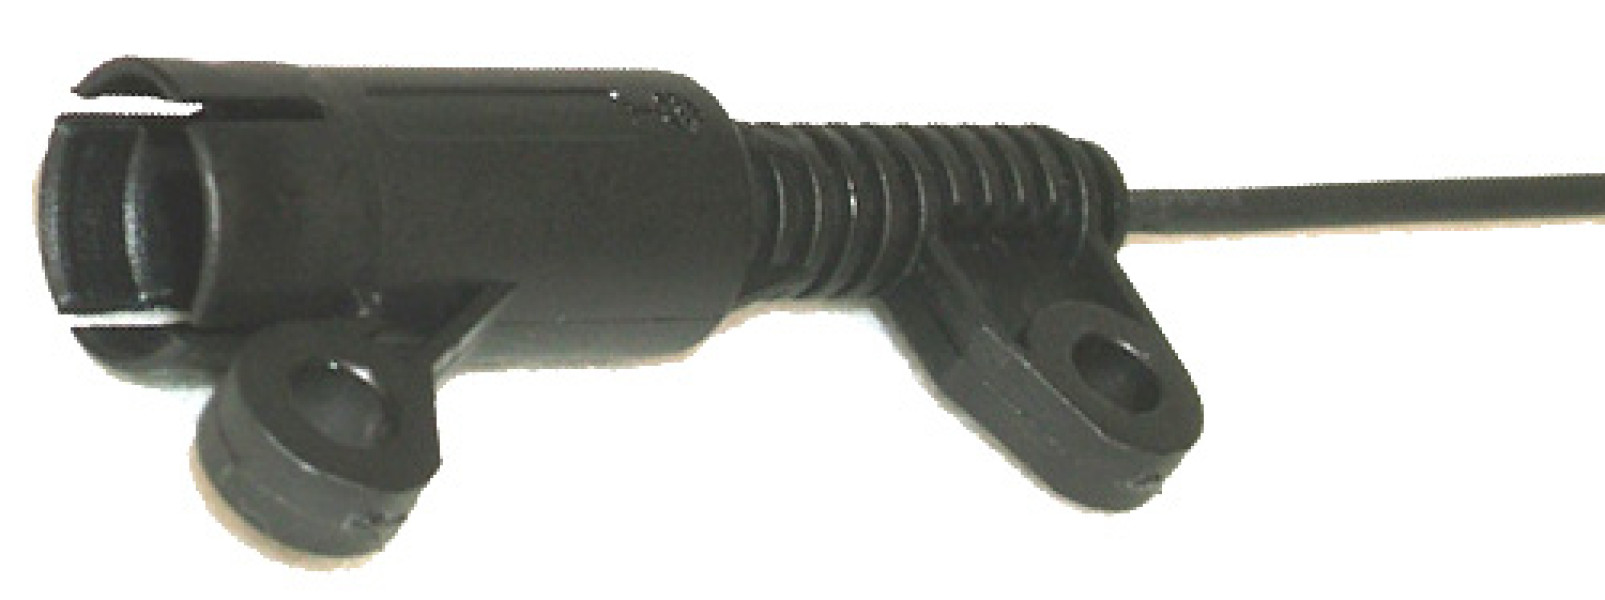 Image of A/C Compressor Clutch Connector from Sunair. Part number: PT-4045